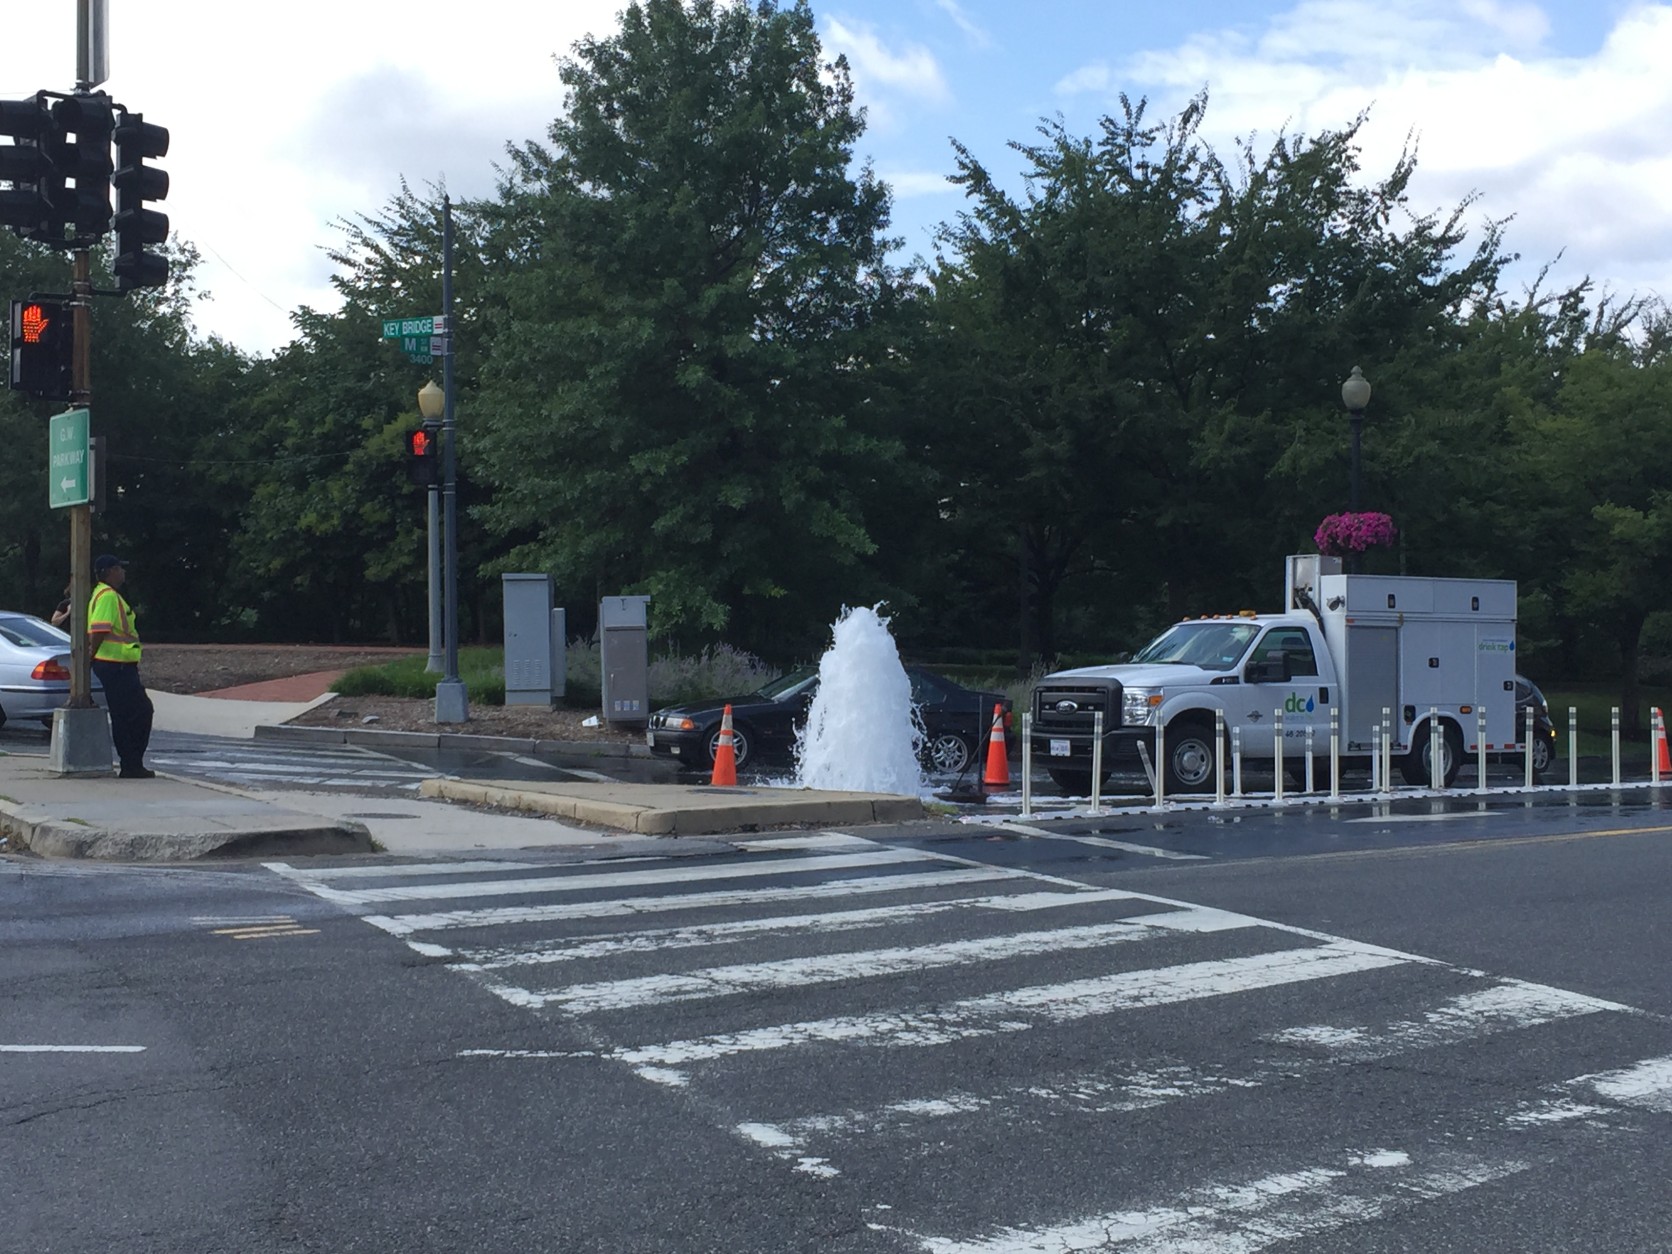 A water main burst on inbound Canal Road in D.C. on Aug. 11, 2015. (WTOP/Megan O'Rourke)